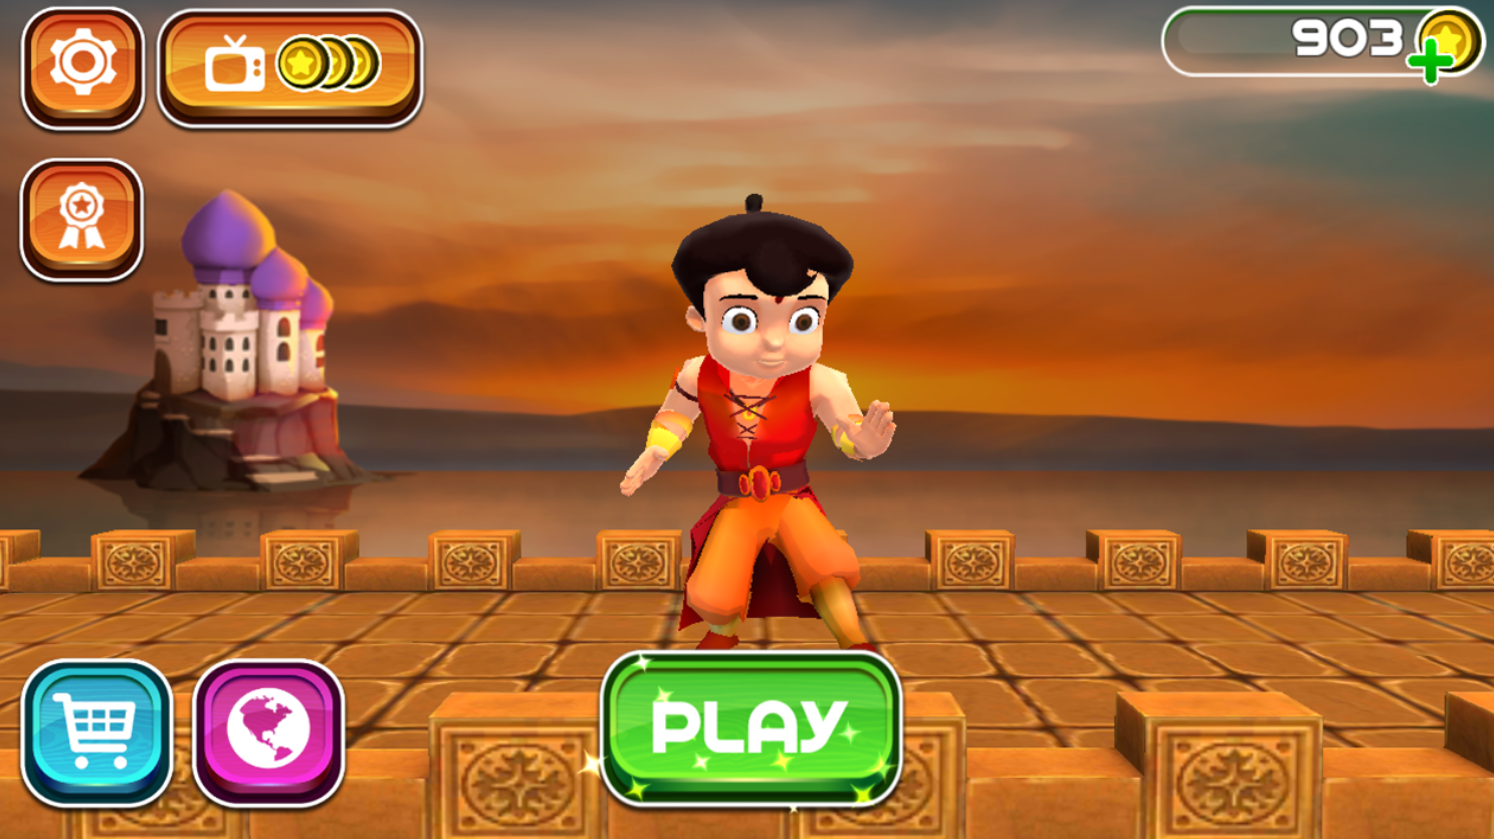 Best Chhota Bheem Games for Android